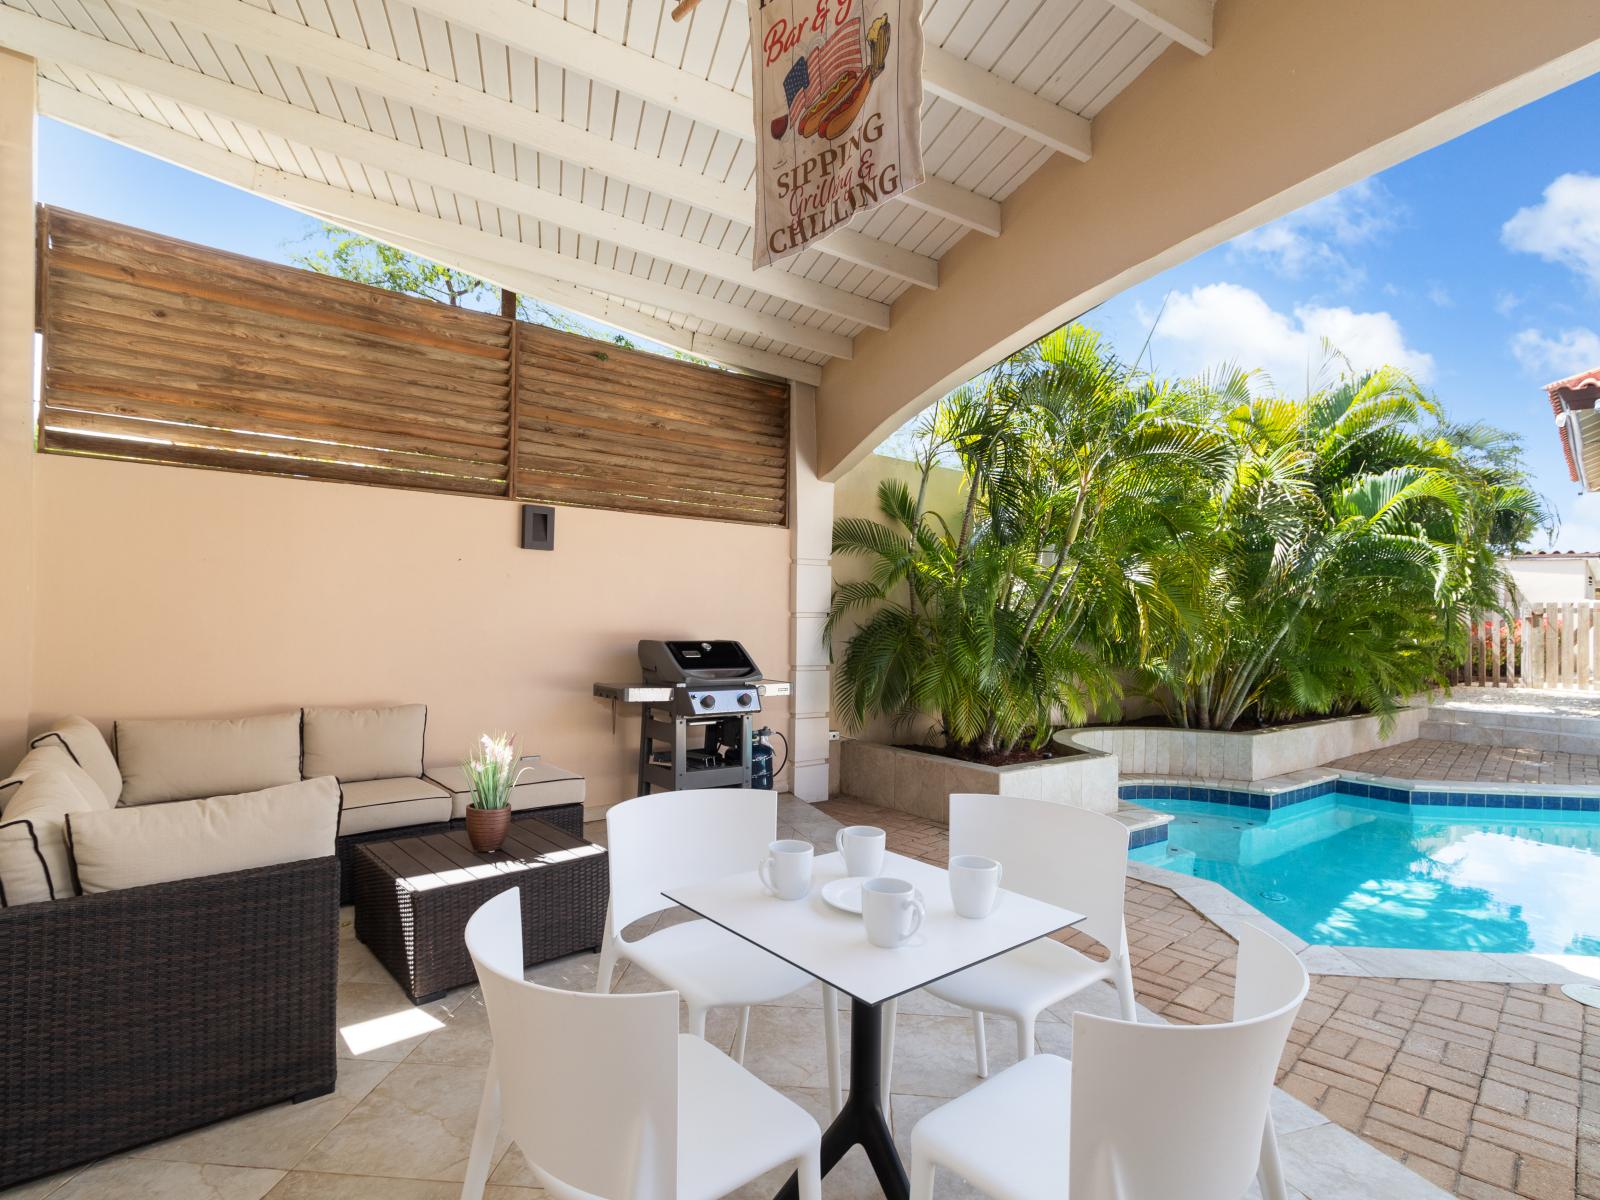 Lounge area next to the pool with your own grill